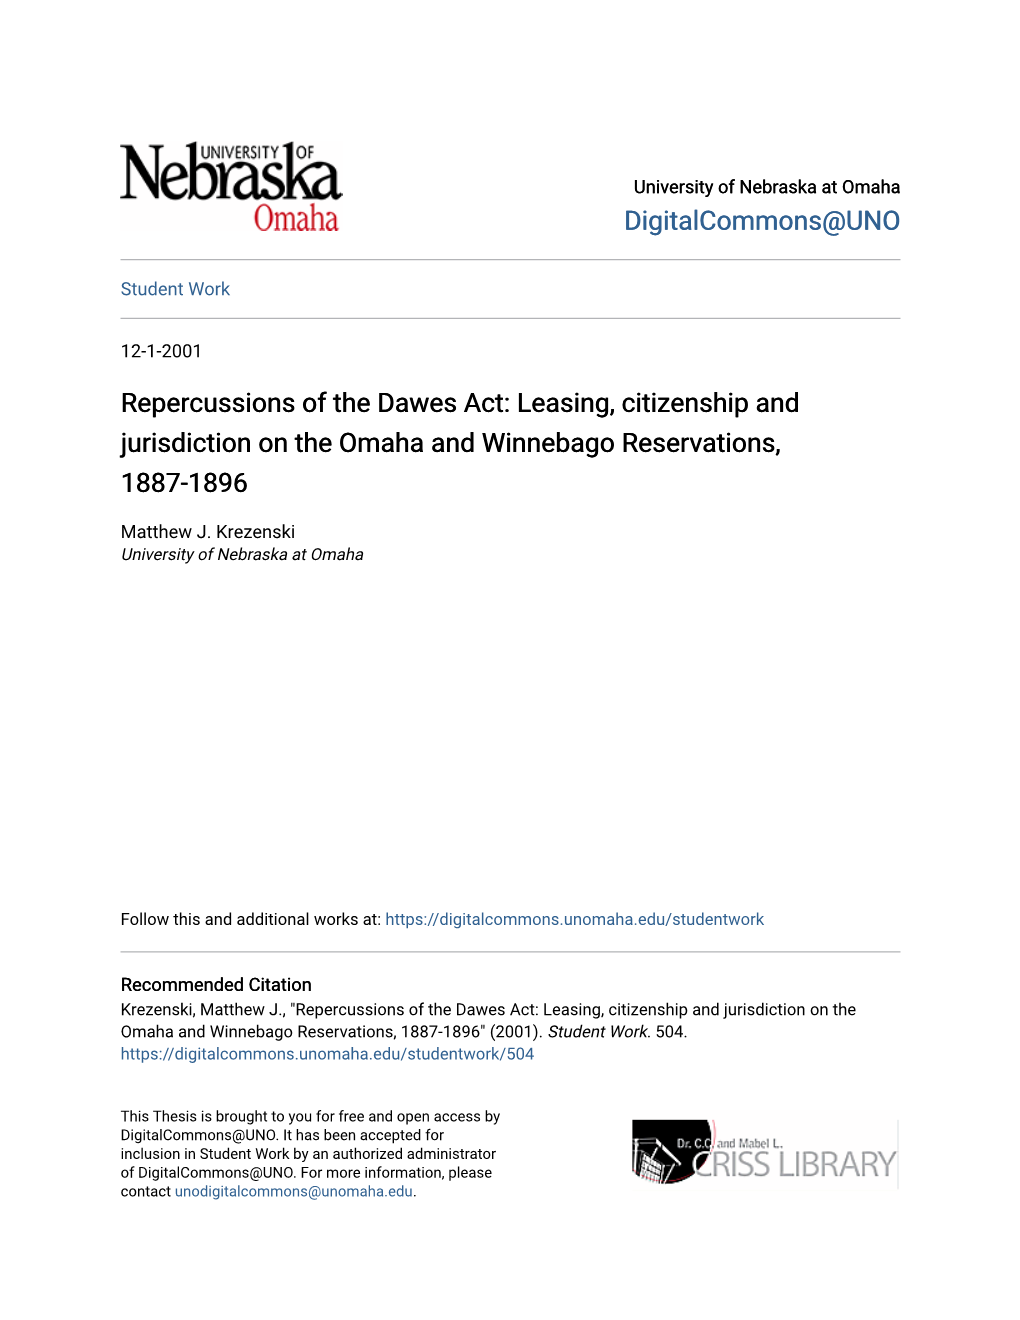 Repercussions of the Dawes Act: Leasing, Citizenship and Jurisdiction on the Omaha and Winnebago Reservations, 1887-1896